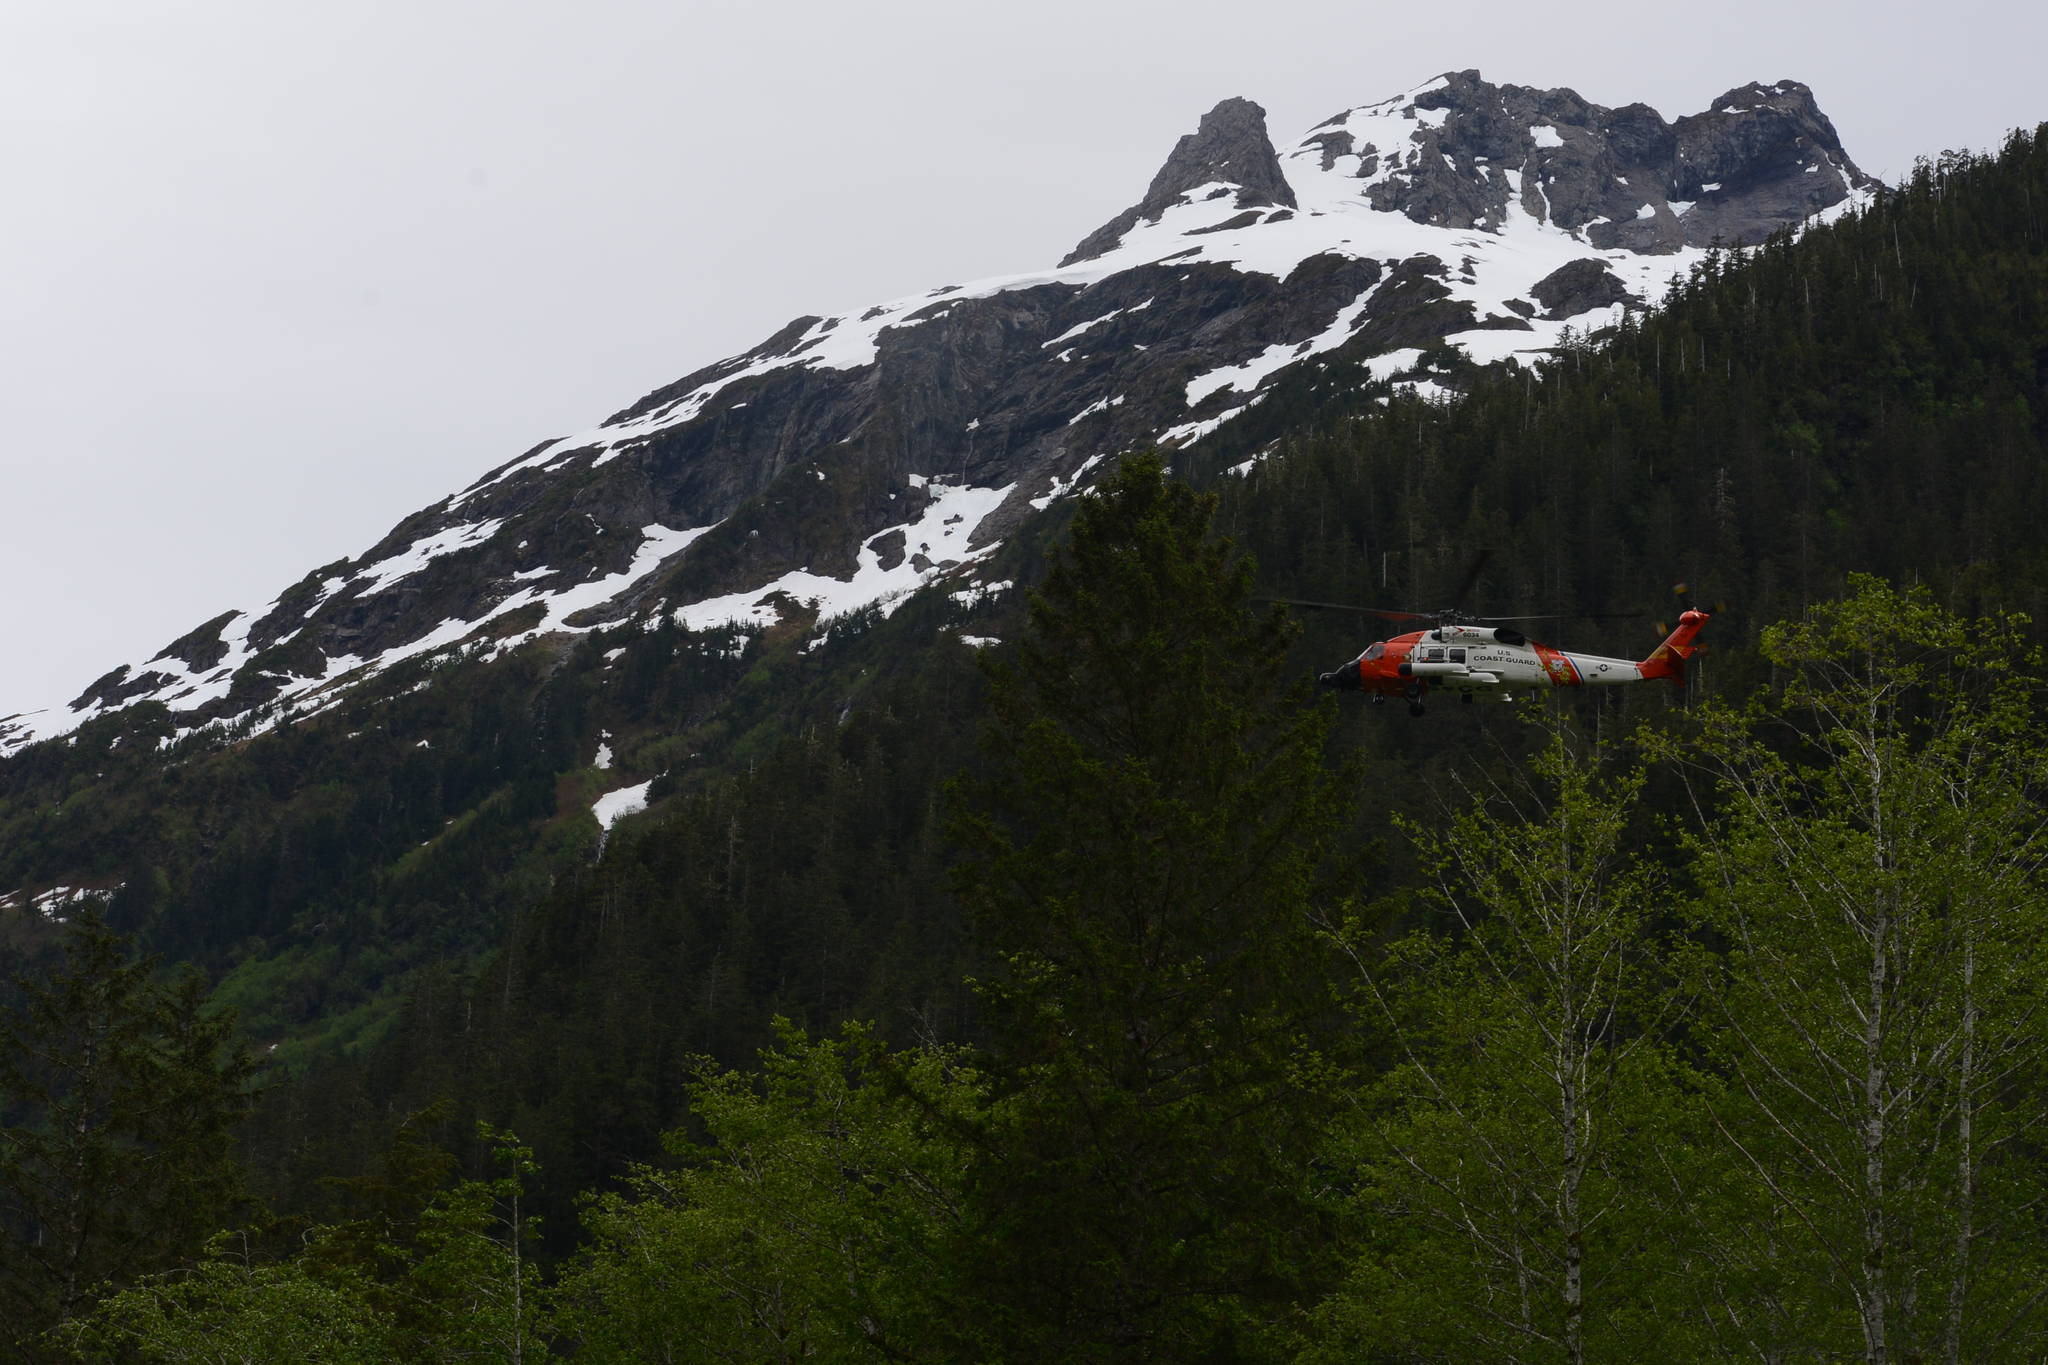 An MH-60 Jayhawk helicopter from the Coast Guard Air Station Sitka searches for missing Hydaburg man Frances Charles on June 23. The search was suspended the next day after no trace of Charles was found. (Photo courtesy of the United States Coast Guard)